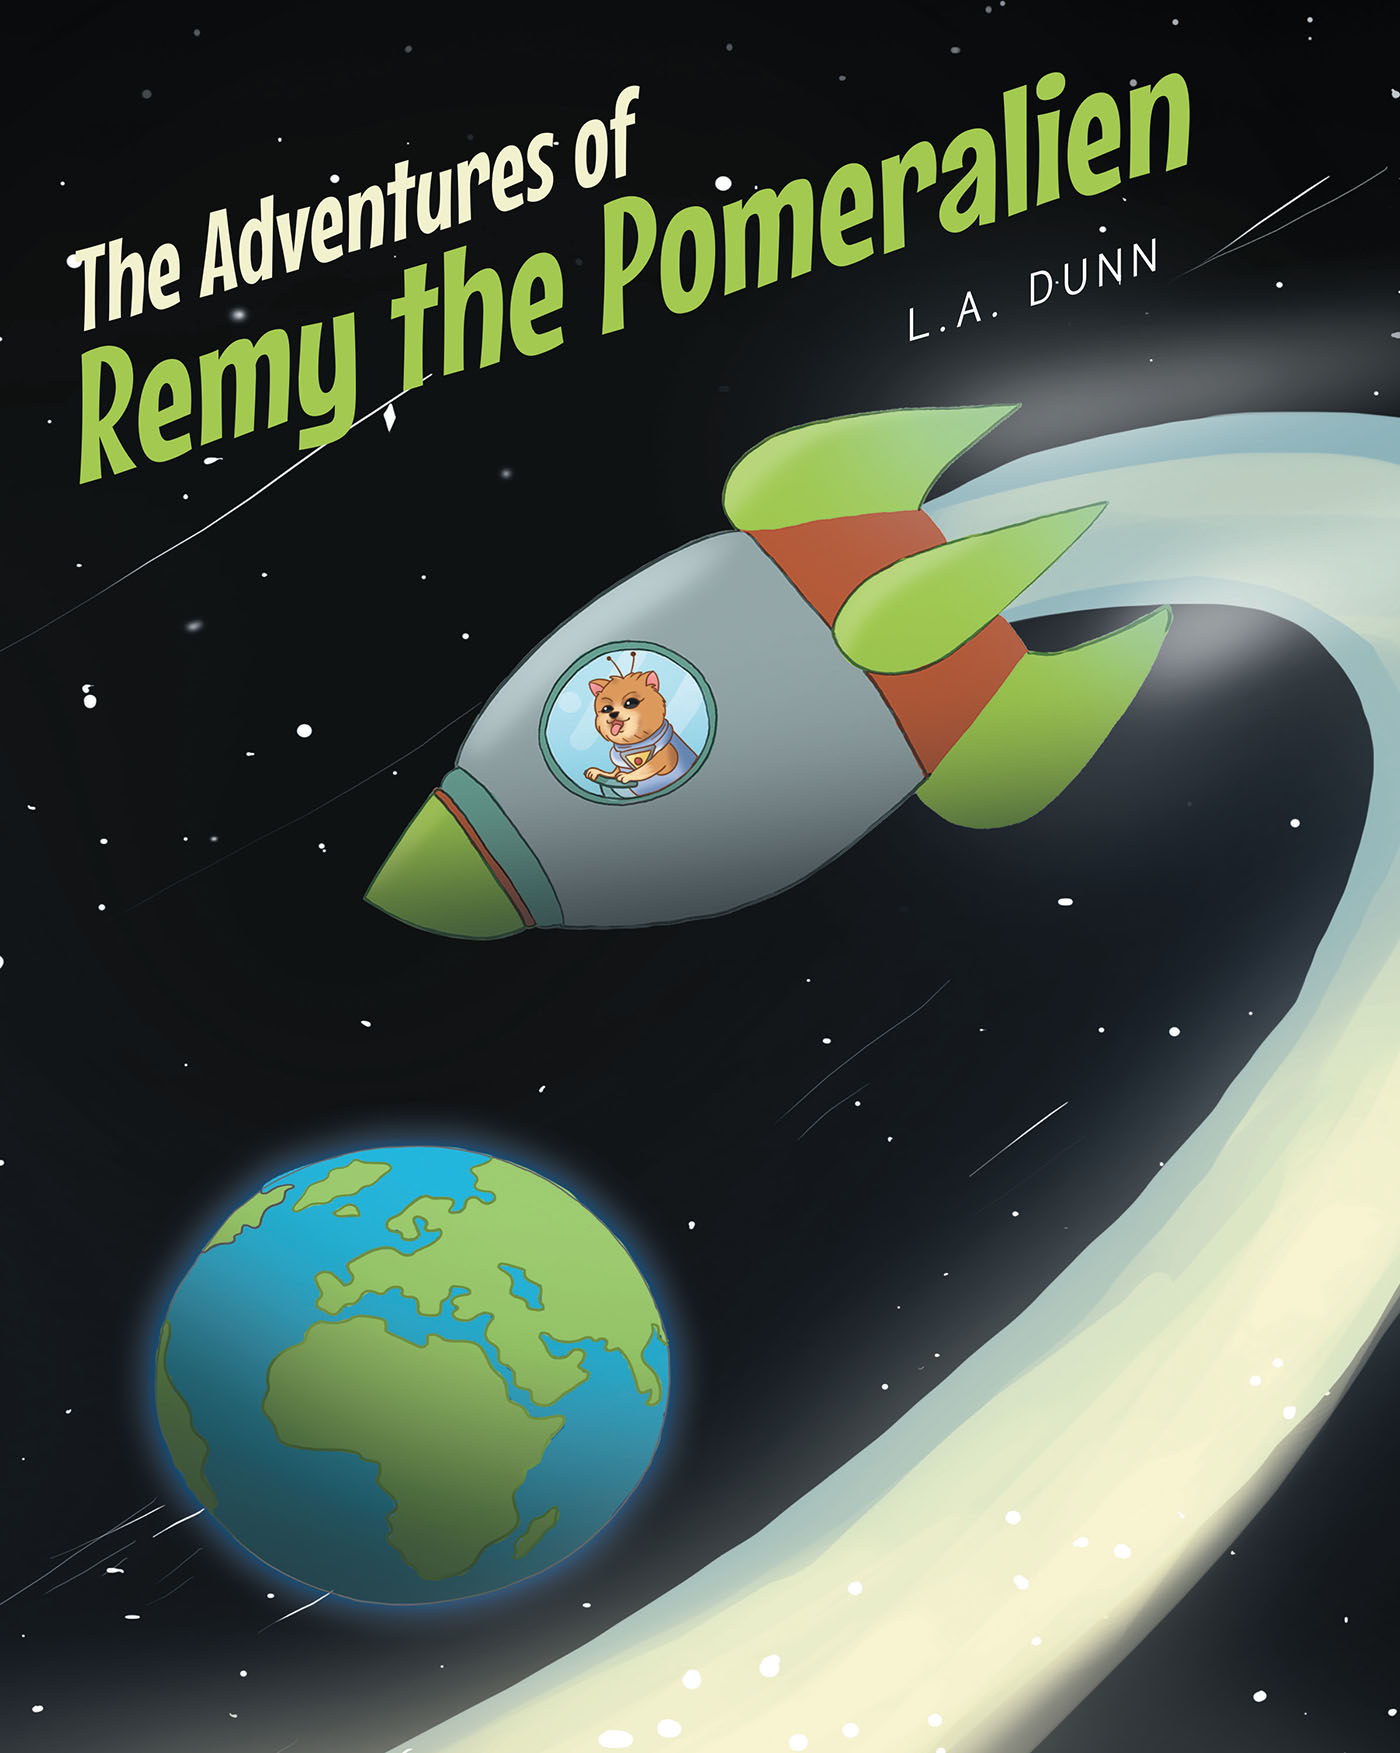 Author L.A. Dunn’s New Book, "The Adventures of Remy the Pomeralien," Follows a Friendly Alien Who Visits Different Places to Learn All There is to Know About Earth